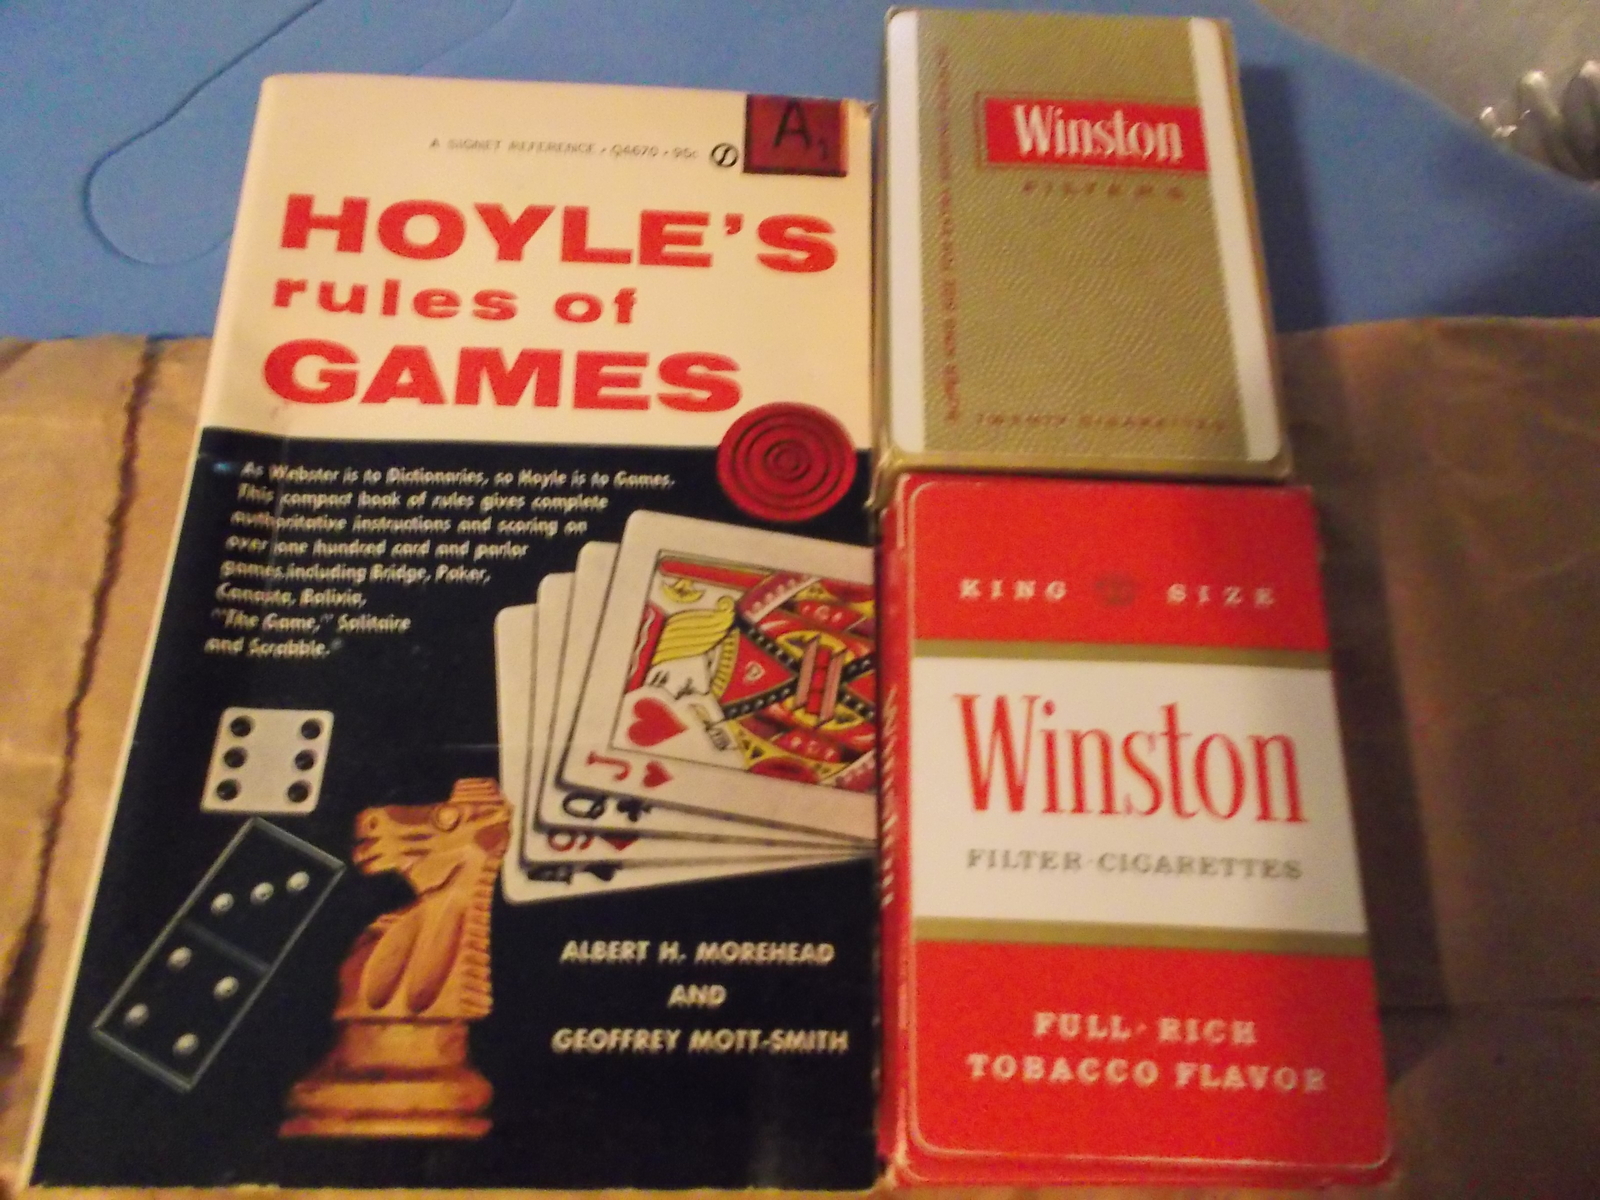 Winston Cigarettes Playing Cards & Card Games Rule Book New in package-Vintage - $30.00